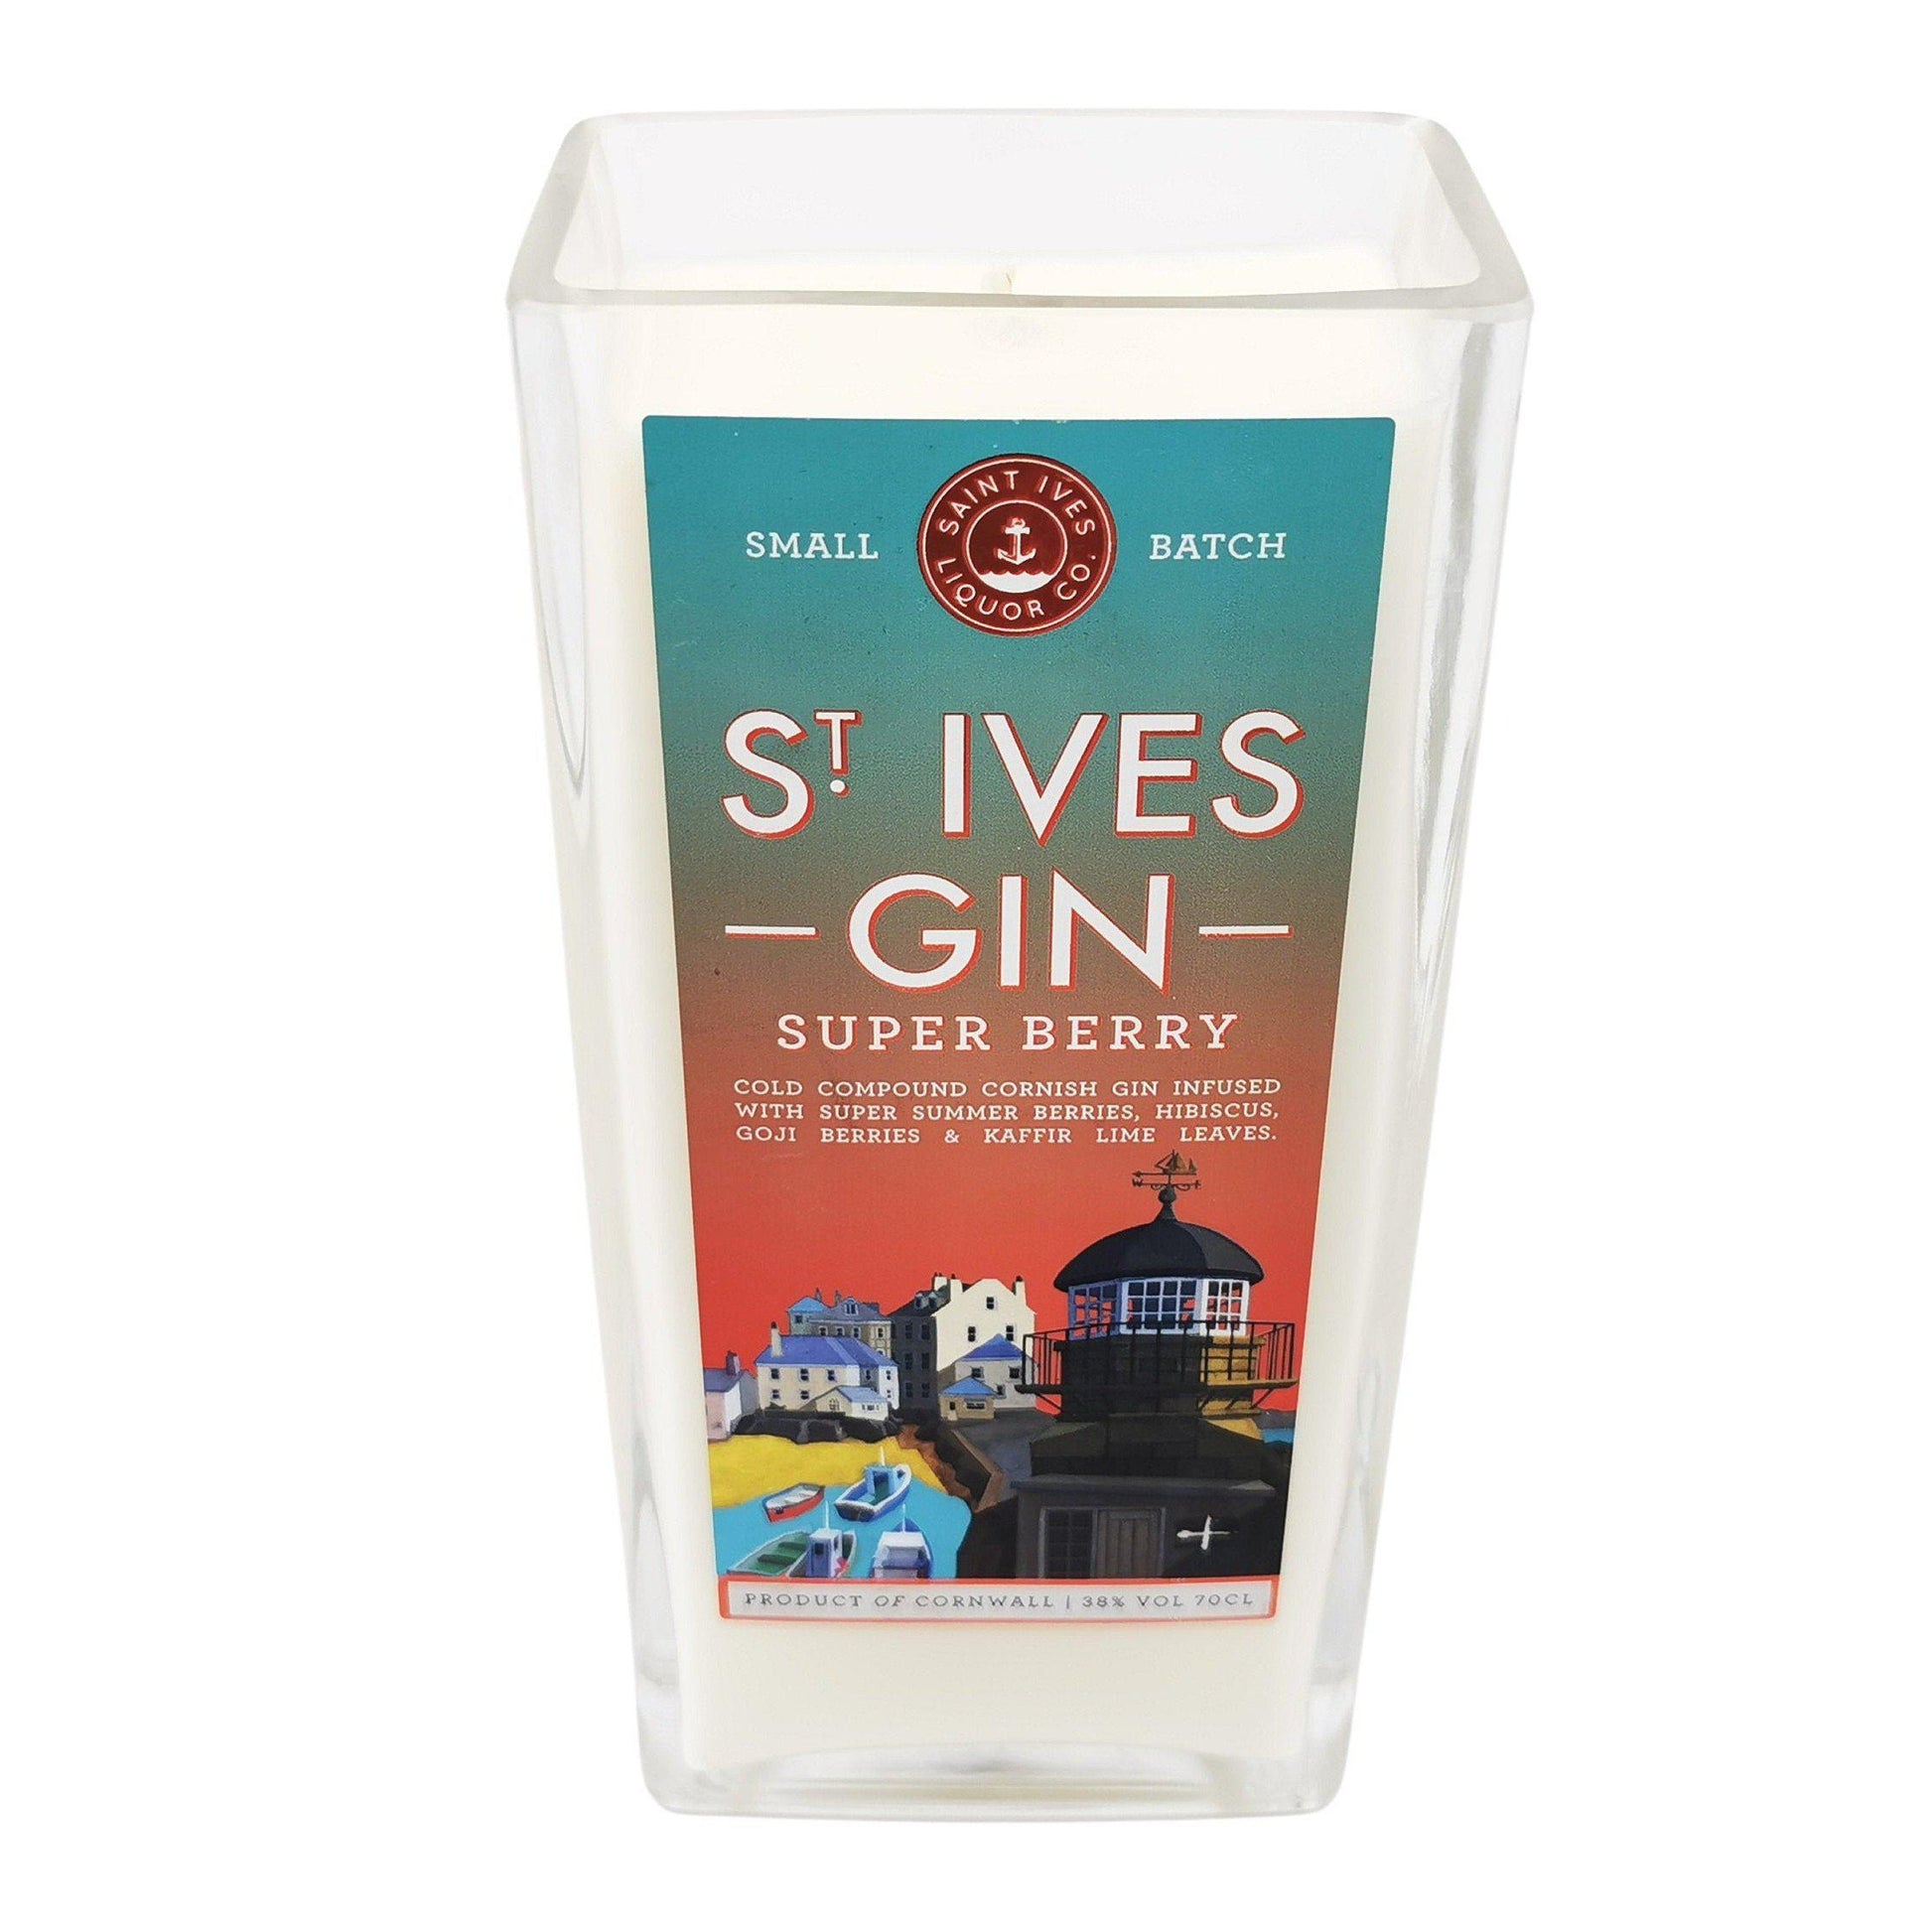 St Ives Super Berry Gin Bottle Candle-Gin Bottle Candles-Adhock Homeware